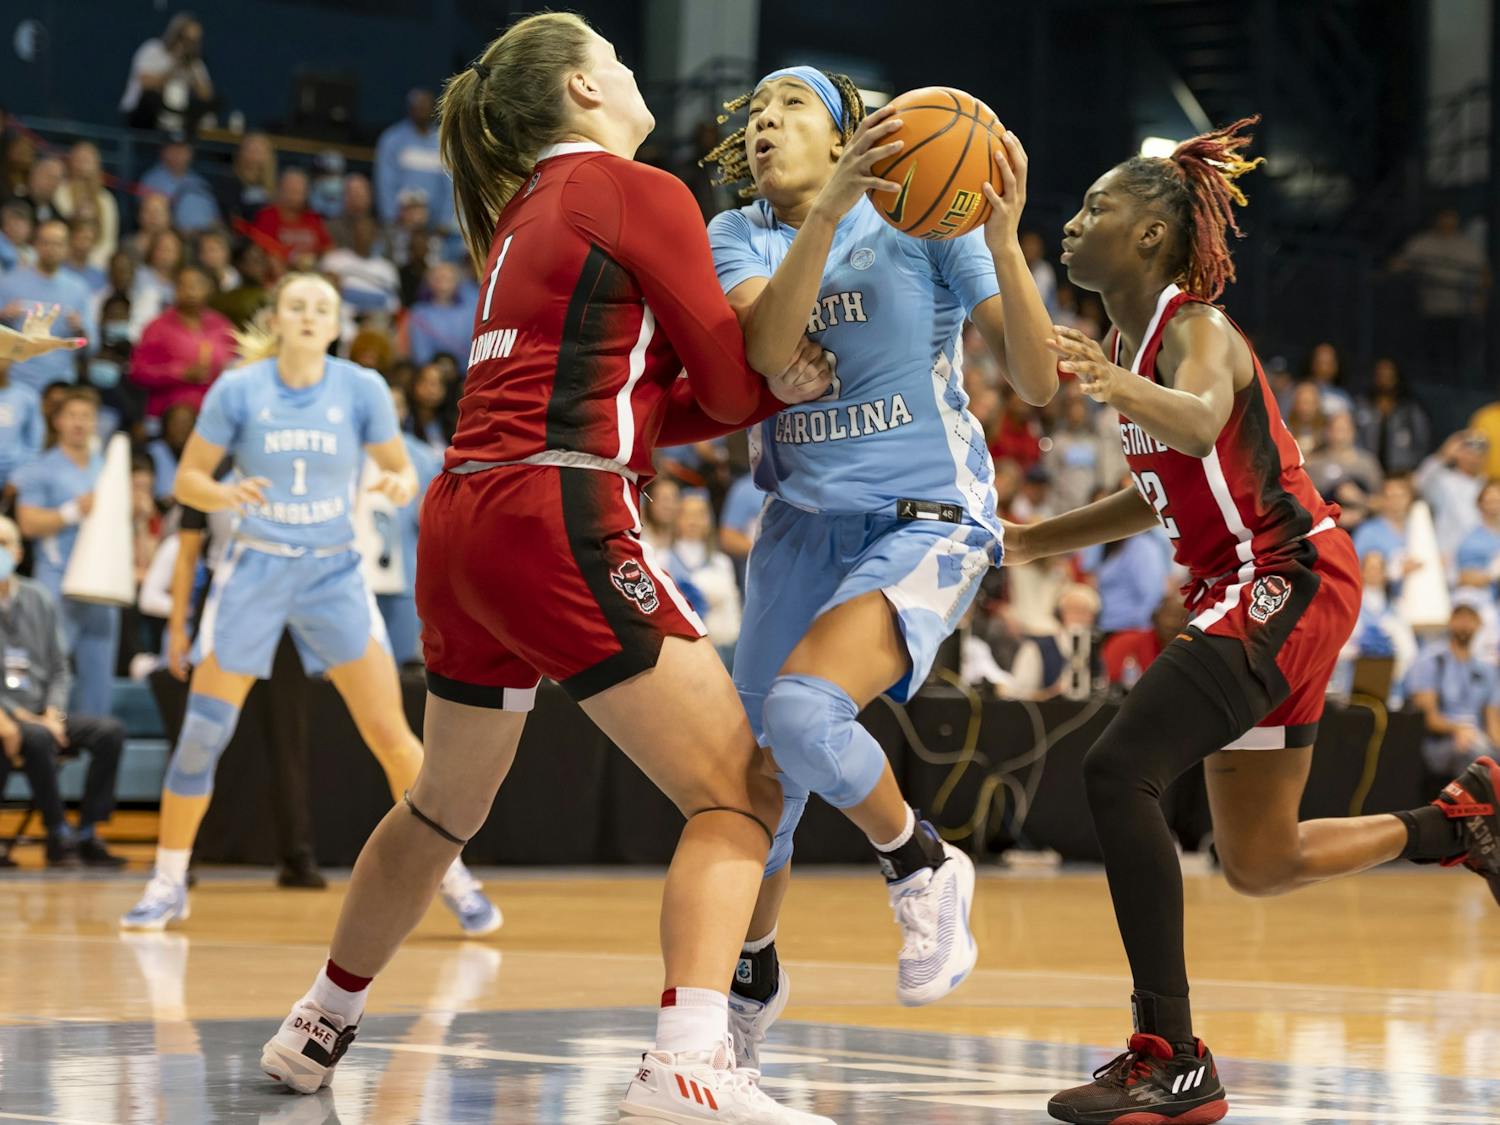 UNC junior guard Kennedy Todd-Williams makes a break towards the basket after stealing the ball from NC State during the game at Carmichael Arena on Sunday, Jan. 15, 2023. UNC won 56-47.